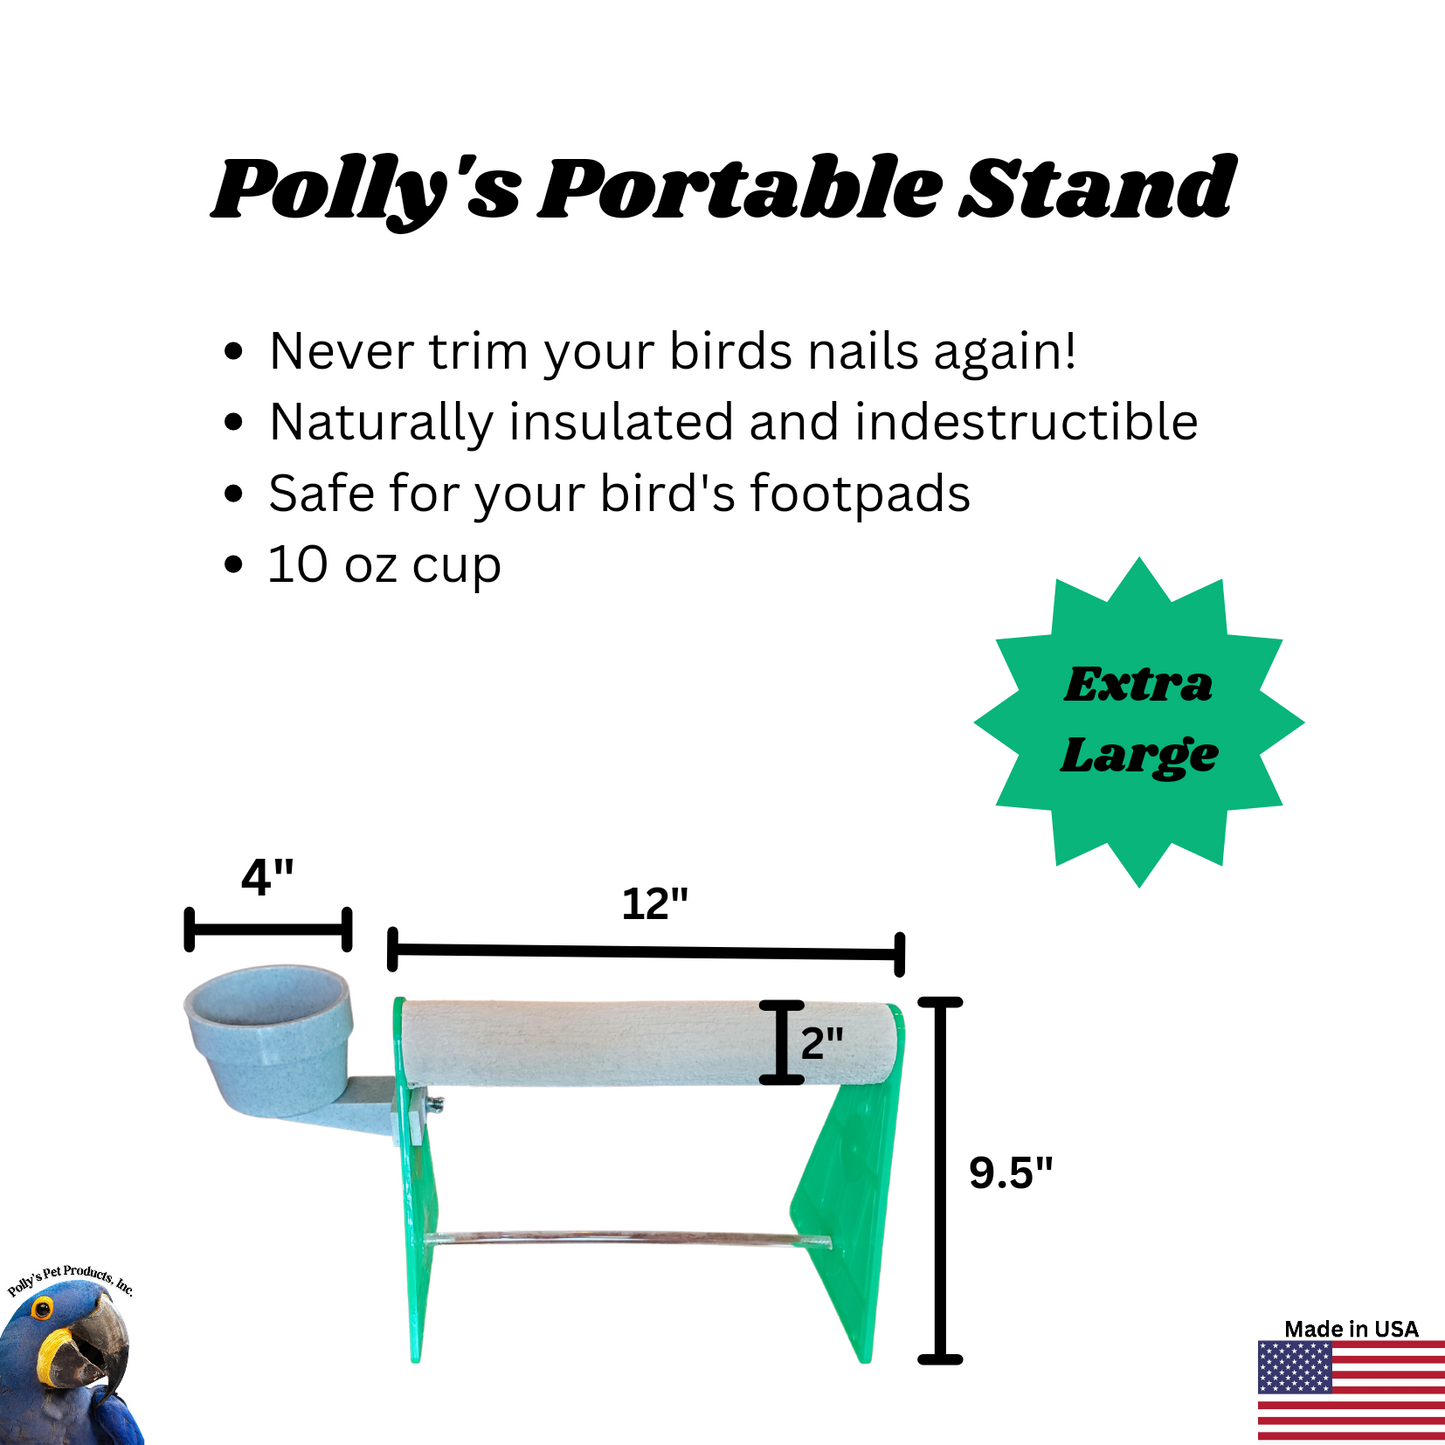 Polly's Portable Stands